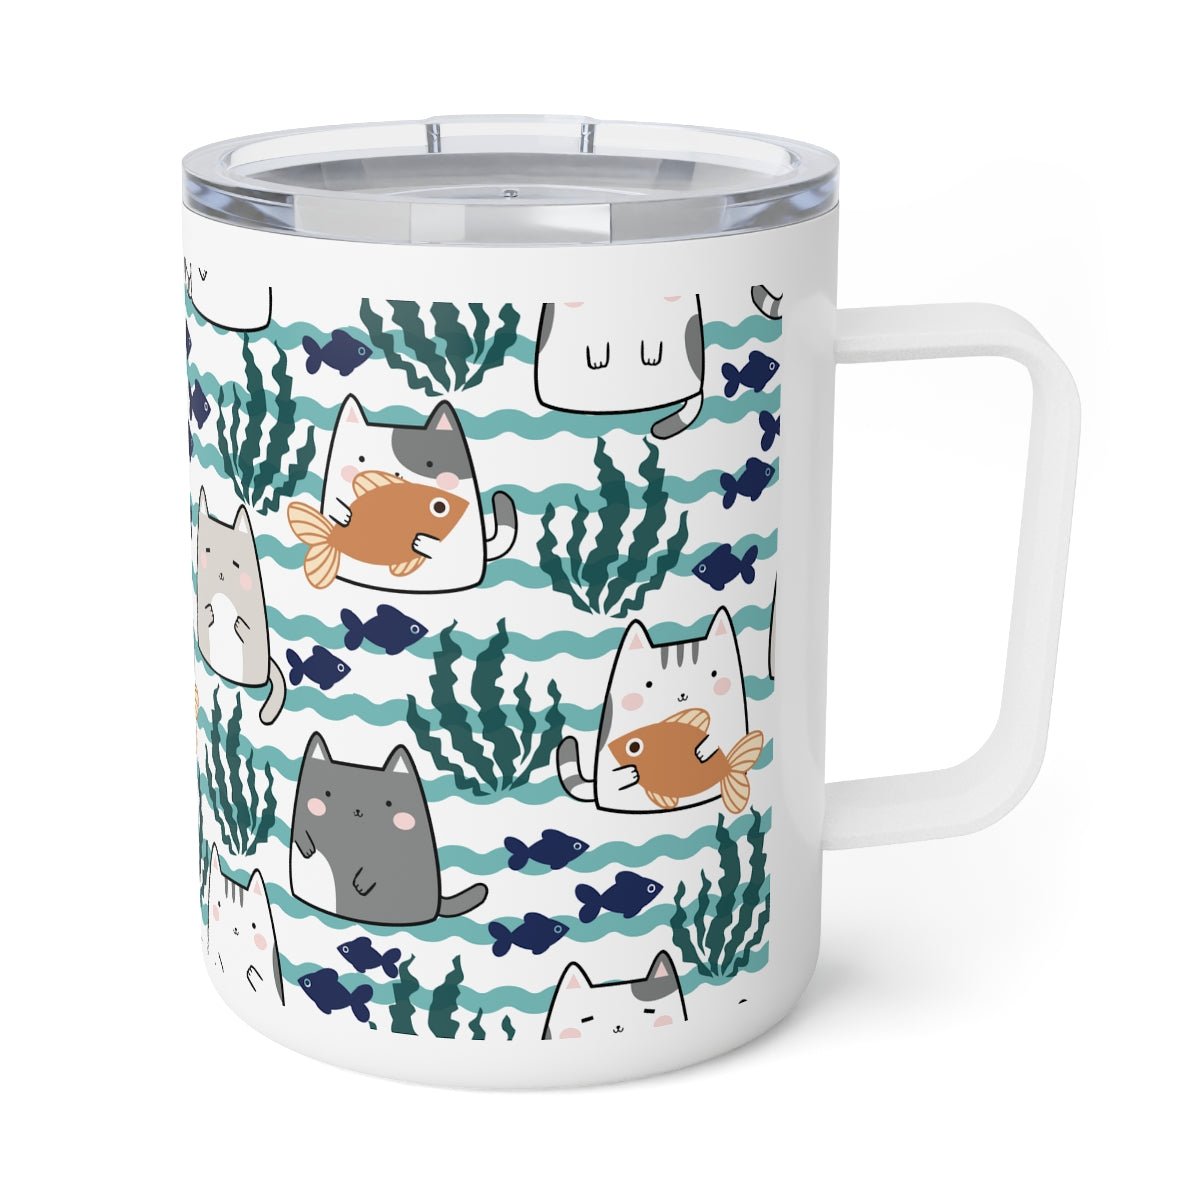 Kawaii Cats and Fishes Insulated Coffee Mug - Puffin Lime